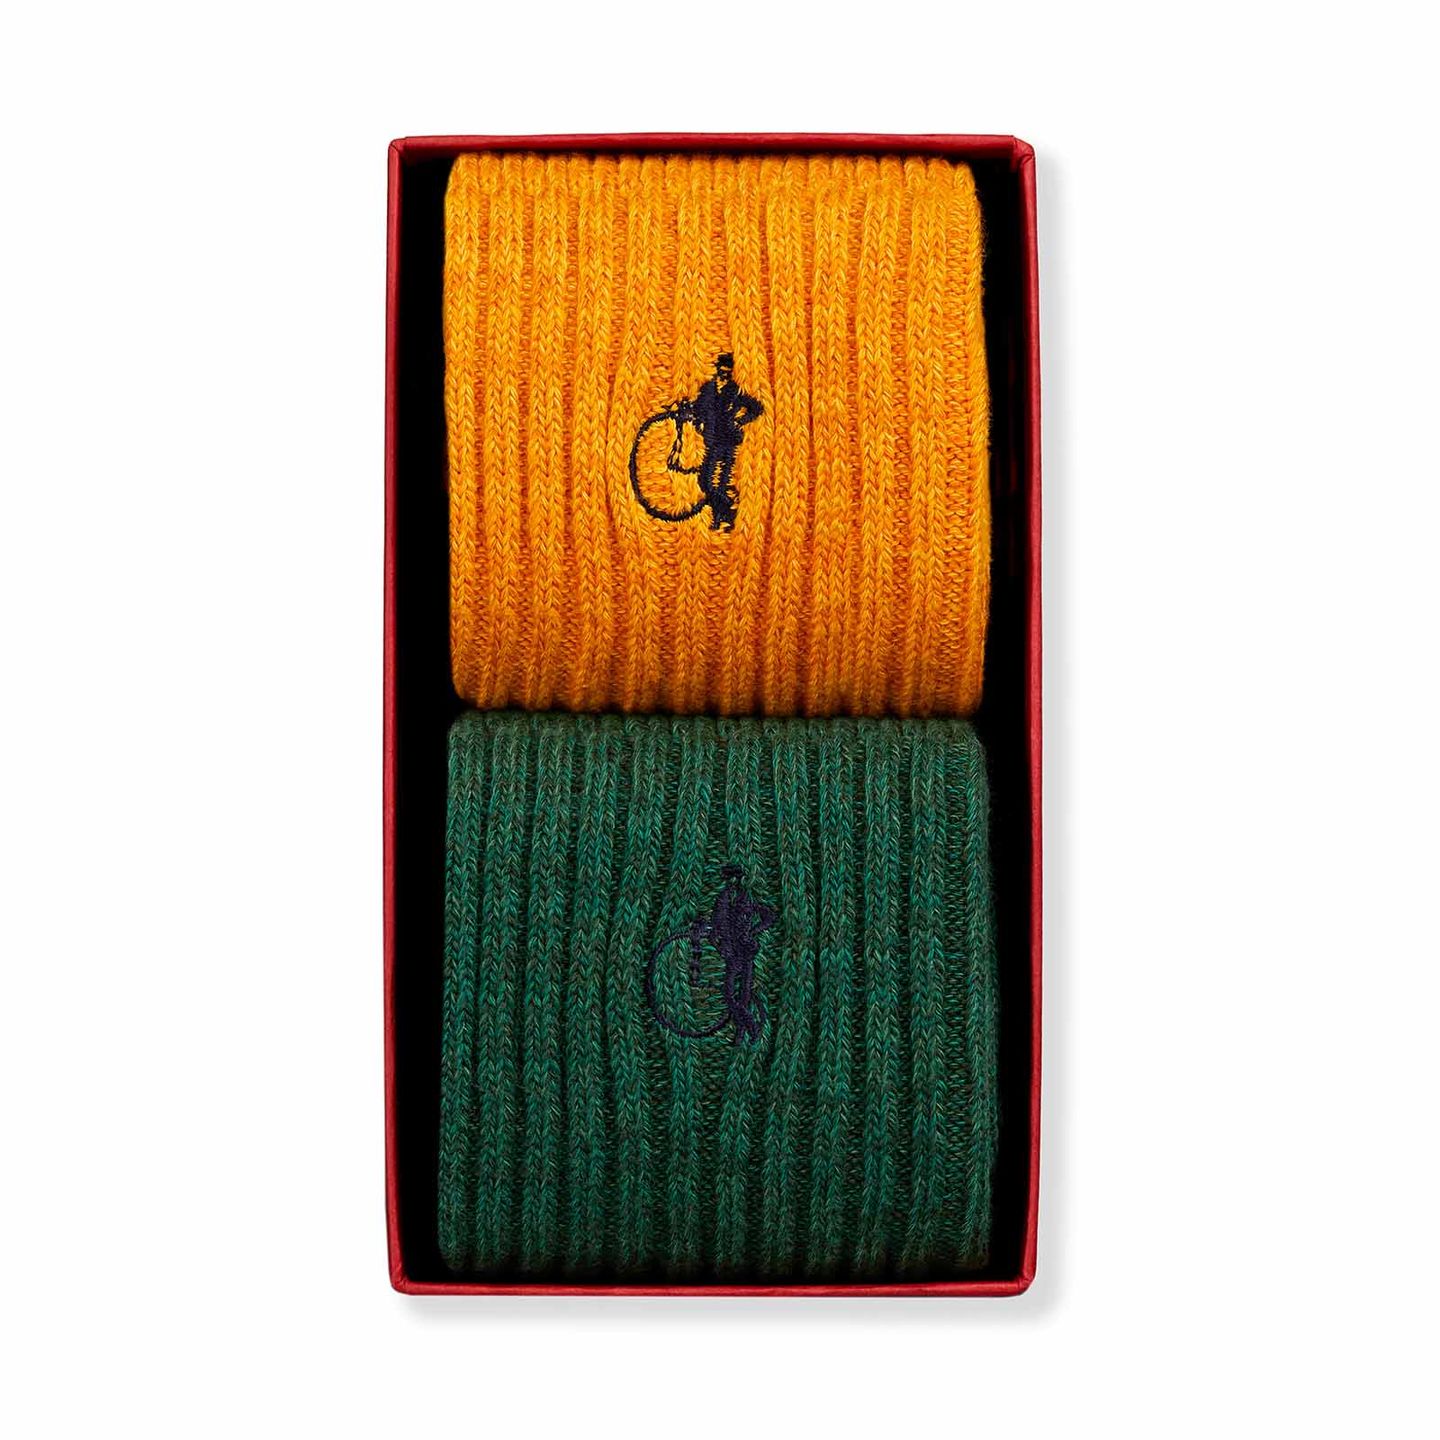 Holland Park Boot 2 pair box with a yellow and green pair with black LSC logo